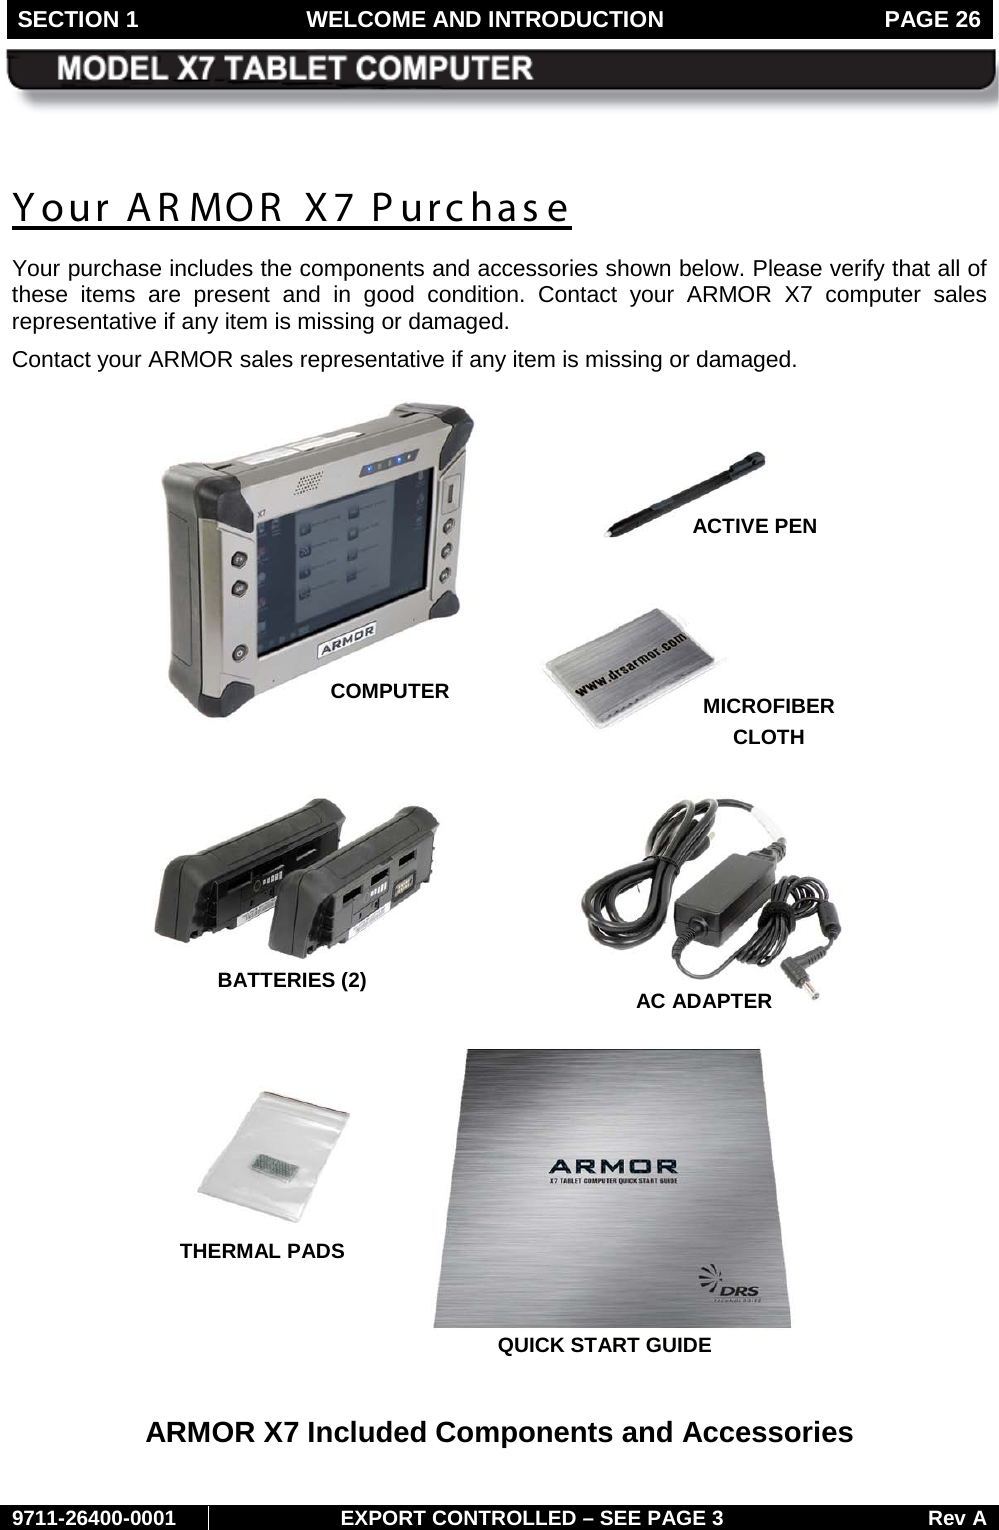 SECTION 1 WELCOME AND INTRODUCTION  PAGE 26        9711-26400-0001 EXPORT CONTROLLED – SEE PAGE 3 Rev A Your AR MOR  X7 Purchase Your purchase includes the components and accessories shown below. Please verify that all of these items are present and in good condition. Contact your ARMOR X7 computer sales representative if any item is missing or damaged.   Contact your ARMOR sales representative if any item is missing or damaged.   ARMOR X7 Included Components and Accessories COMPUTER  AC ADAPTER BATTERIES (2) ACTIVE PEN  MICROFIBER CLOTH  QUICK START GUIDE THERMAL PADS 